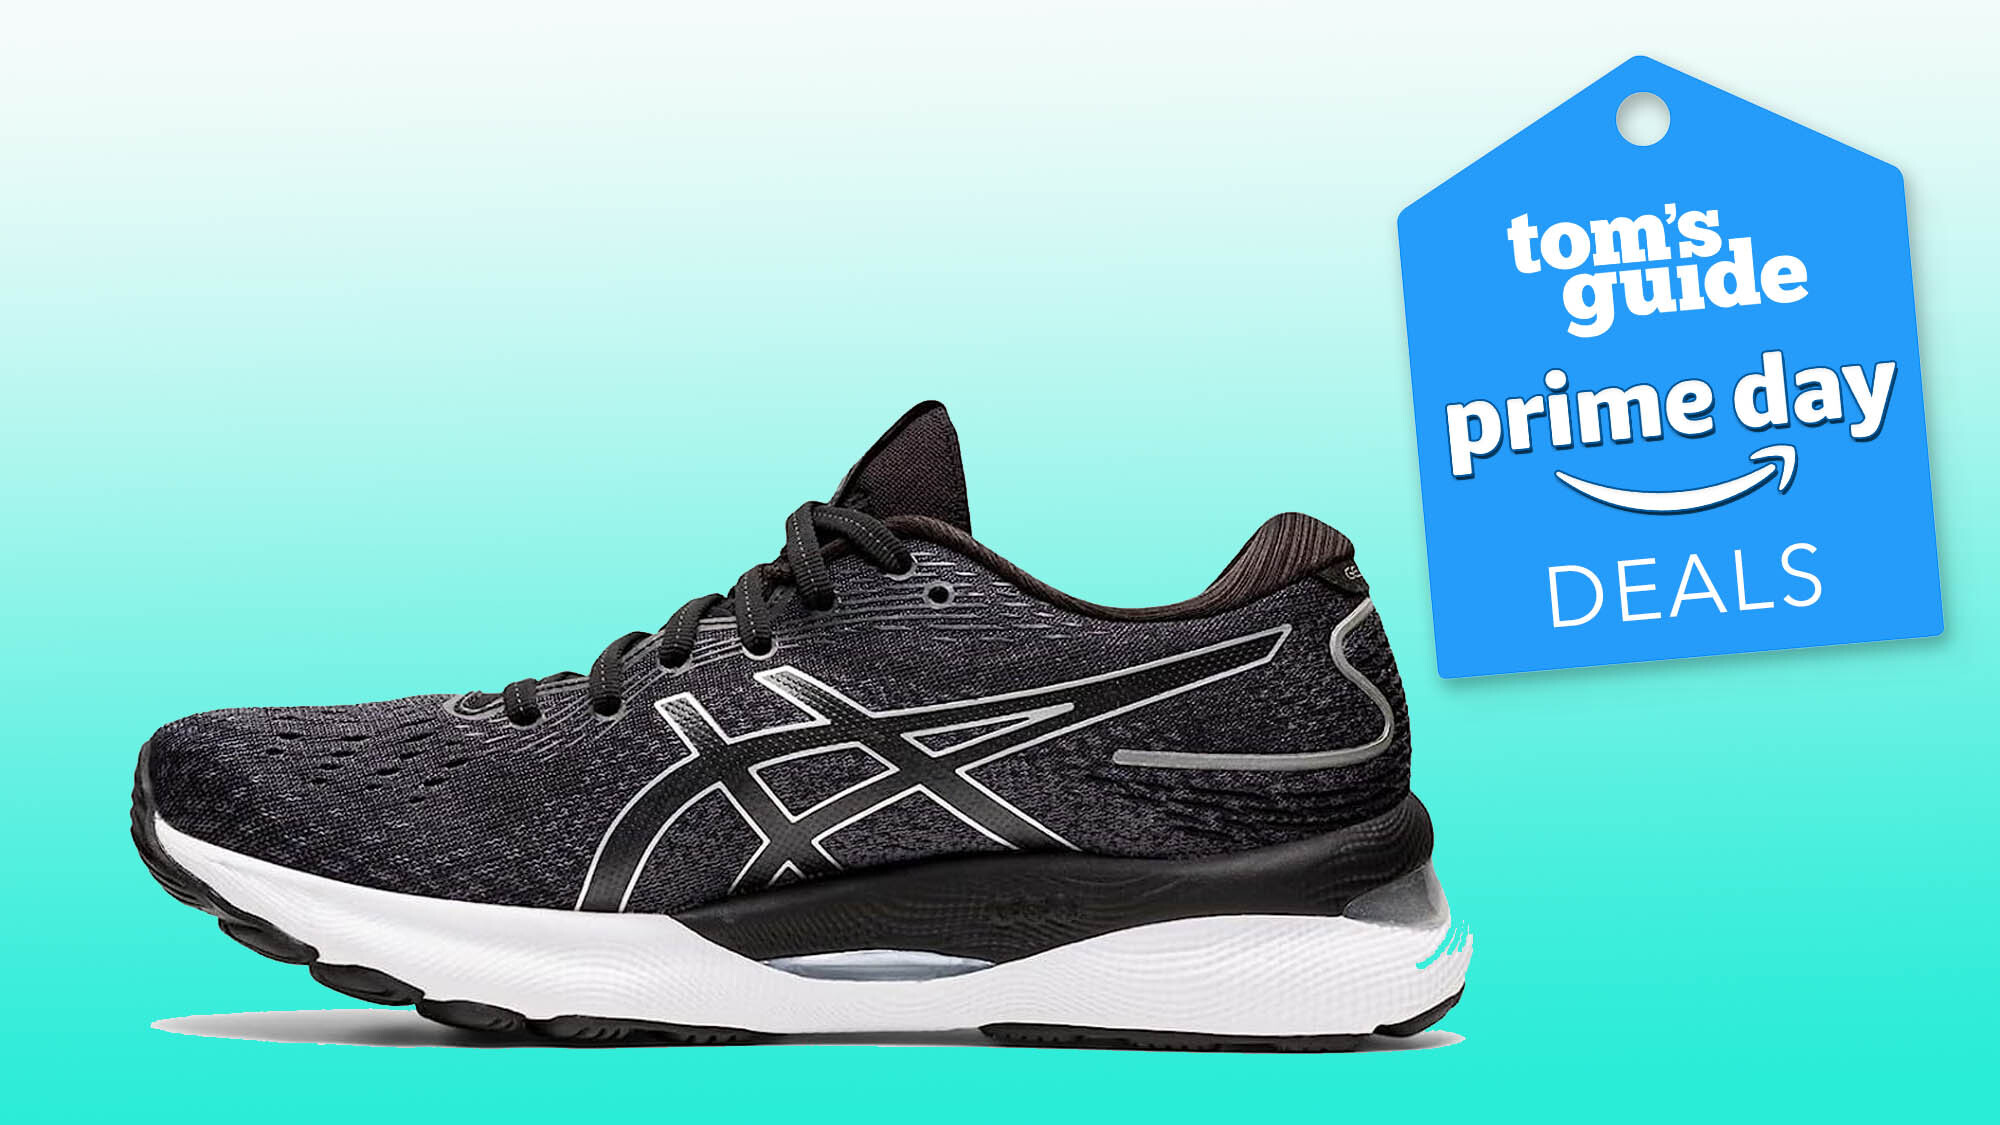 I ran a 10K with the Asics Gel-Nimbus 24 running shoes — and they're on sale  for Prime Day | Tom's Guide